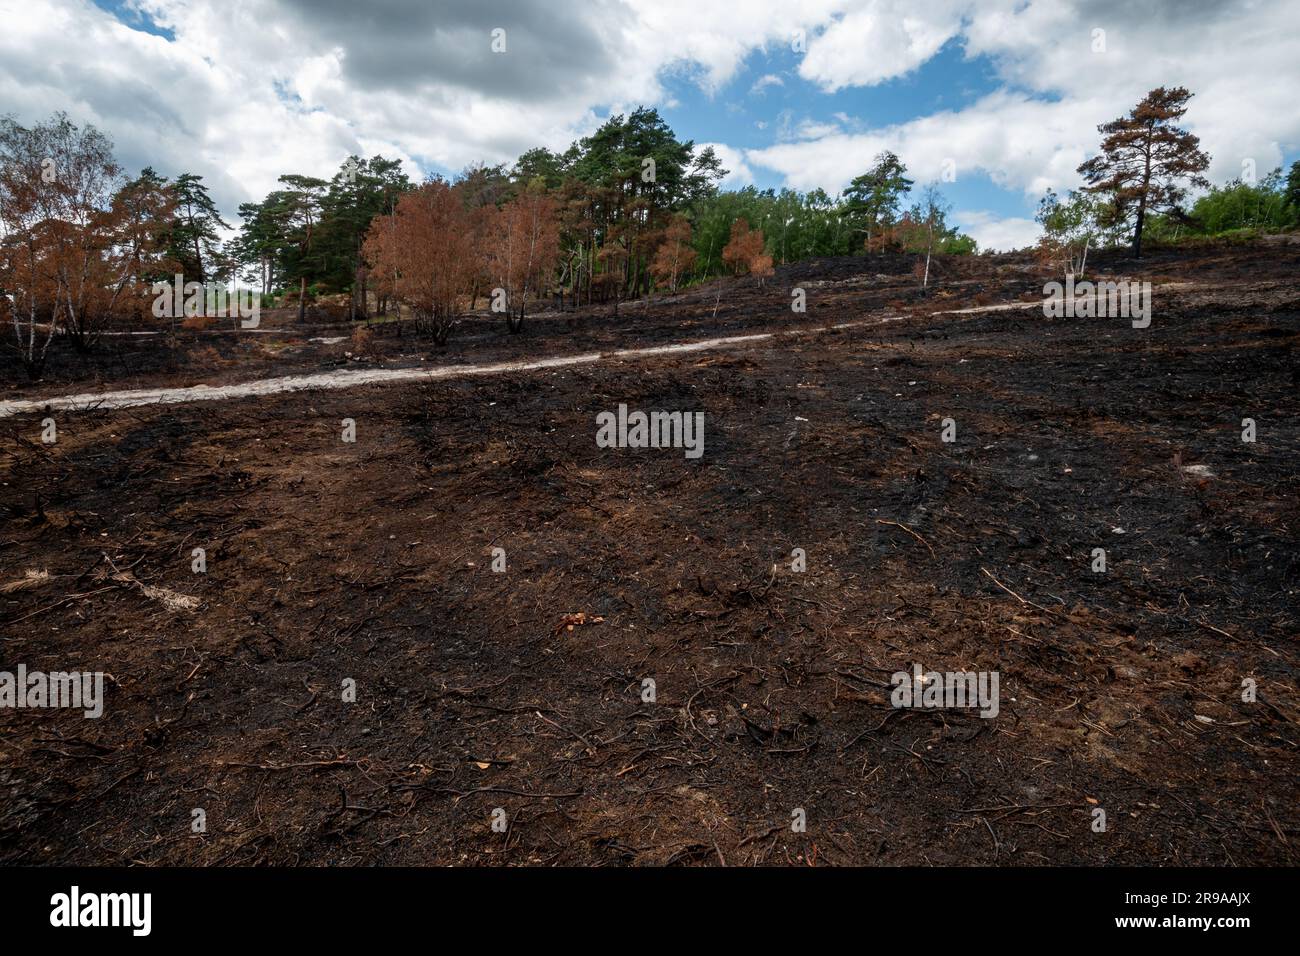 June, 2023. Aftermath of a large heathland fire at Frensham Common in Surrey, England, UK, which started on 29th May 2023. The cause of the wildfire remains unknown. Frensham Common is a site of special scientific interest (SSSI), and the blaze has destroyed an important area of lowland heath which was a habitat for rare reptiles and other wildlife. Stock Photo